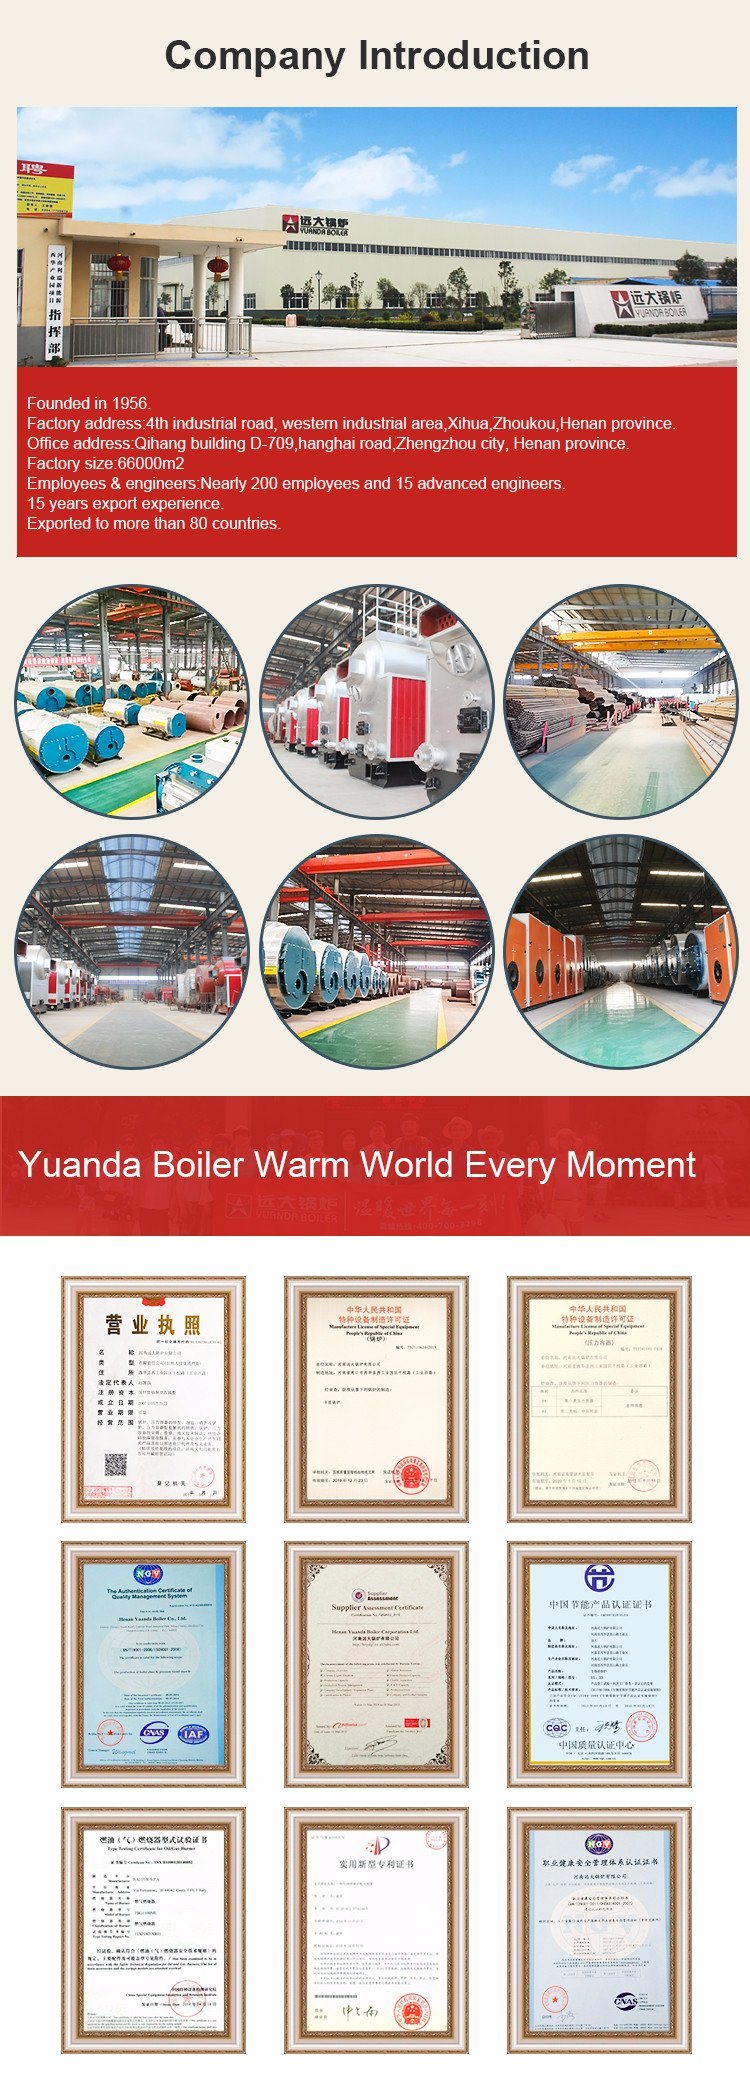 World Leading Industrial Steam Boiler Manufacturer in China